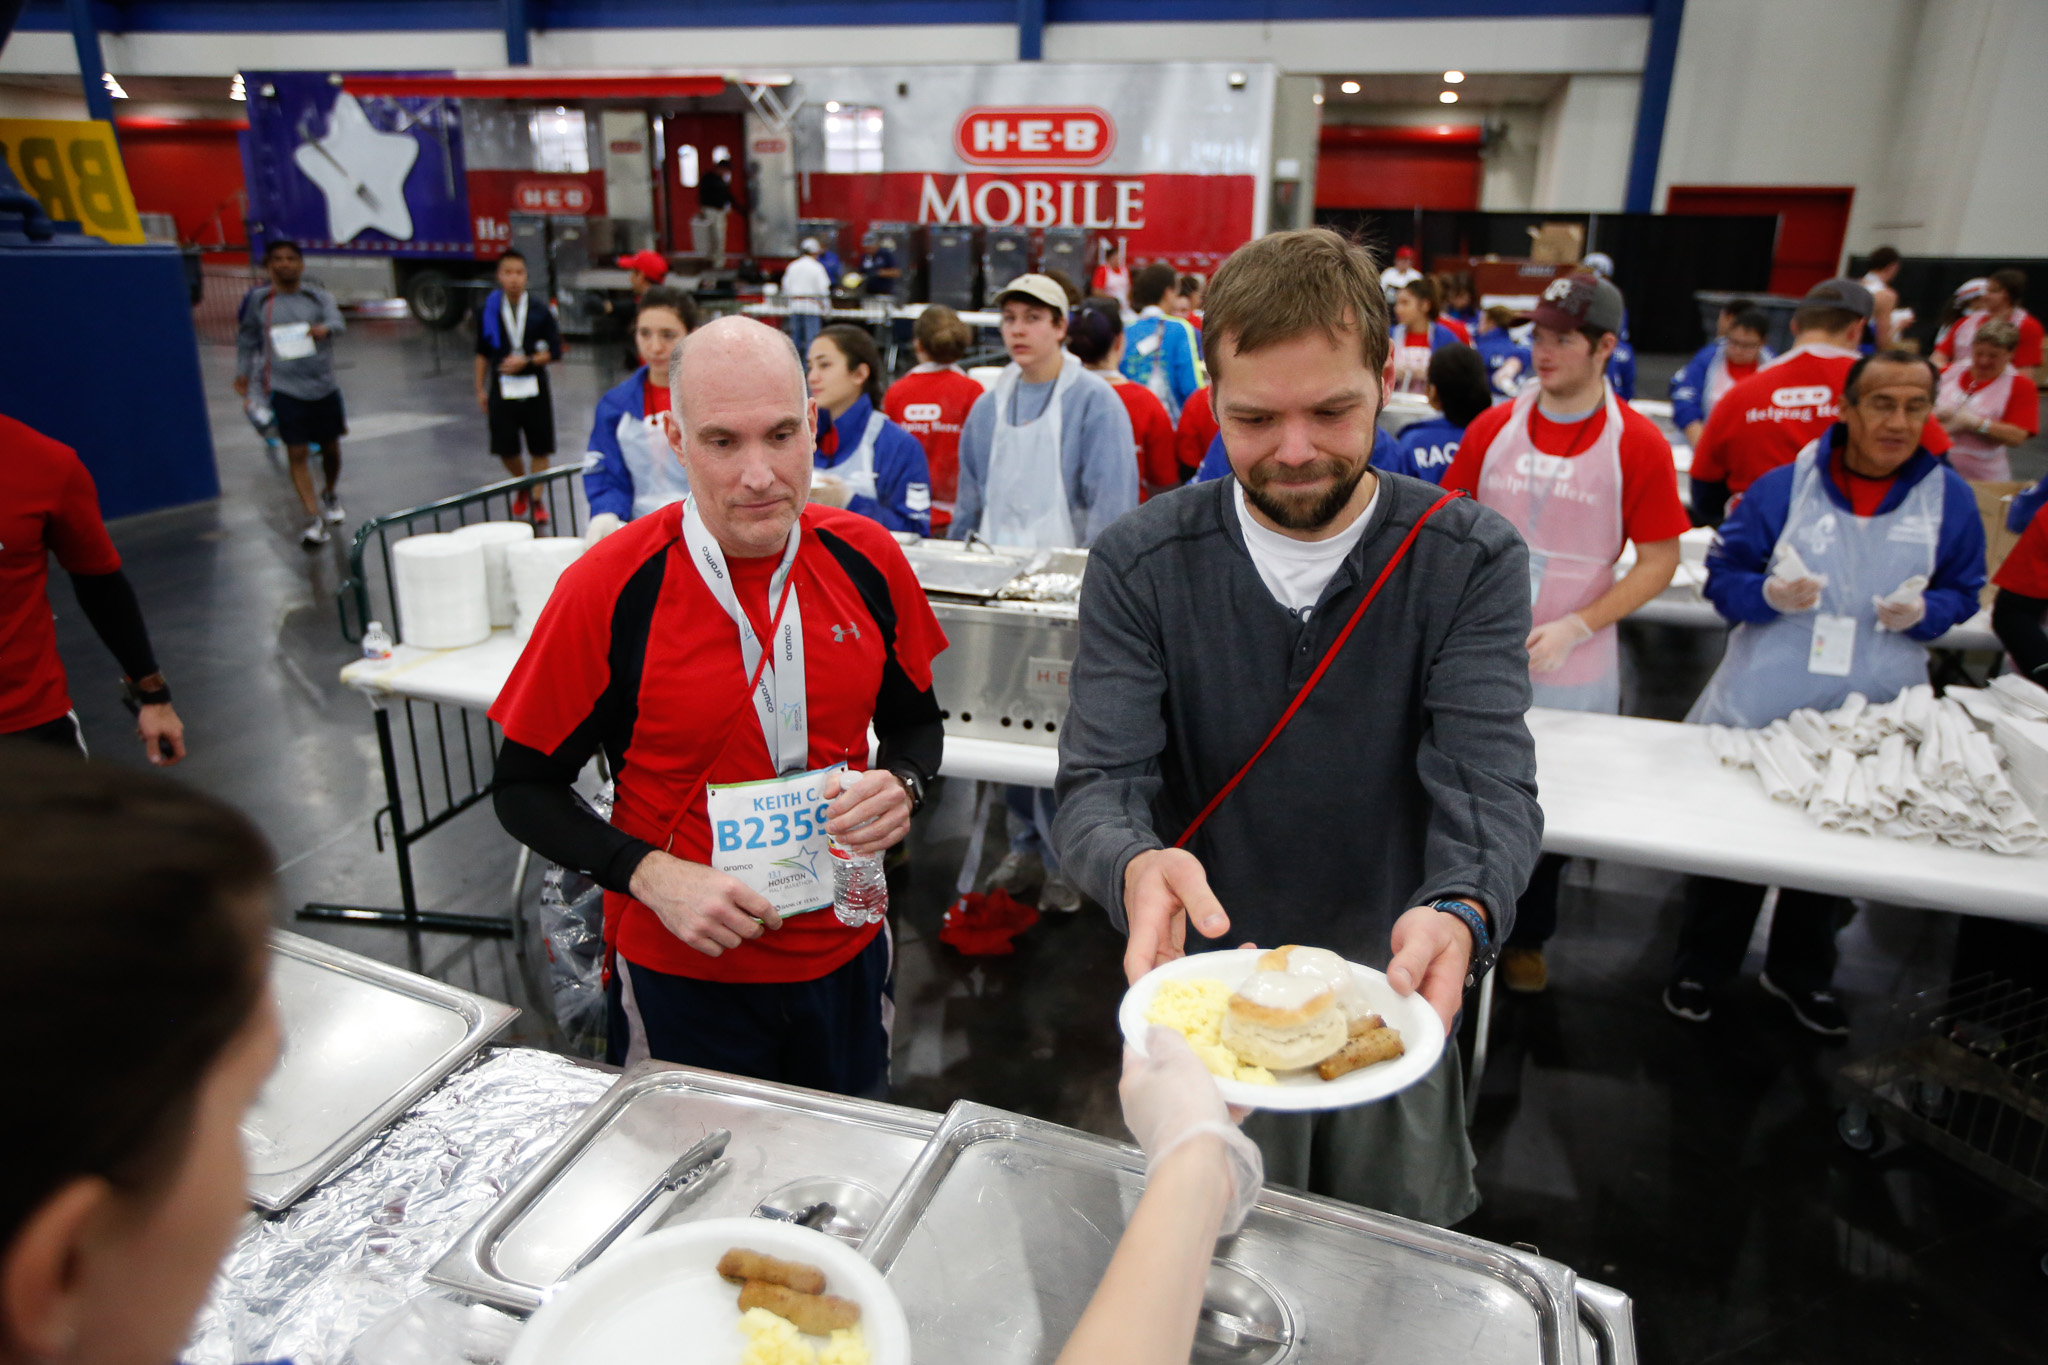 HEB partners feed thousands of Houston Chevron Marathon participants Sunday Jan. 17, 2016 in Houston at the George R. Brown Convention Center.

(Eric Kayne/For HEB)